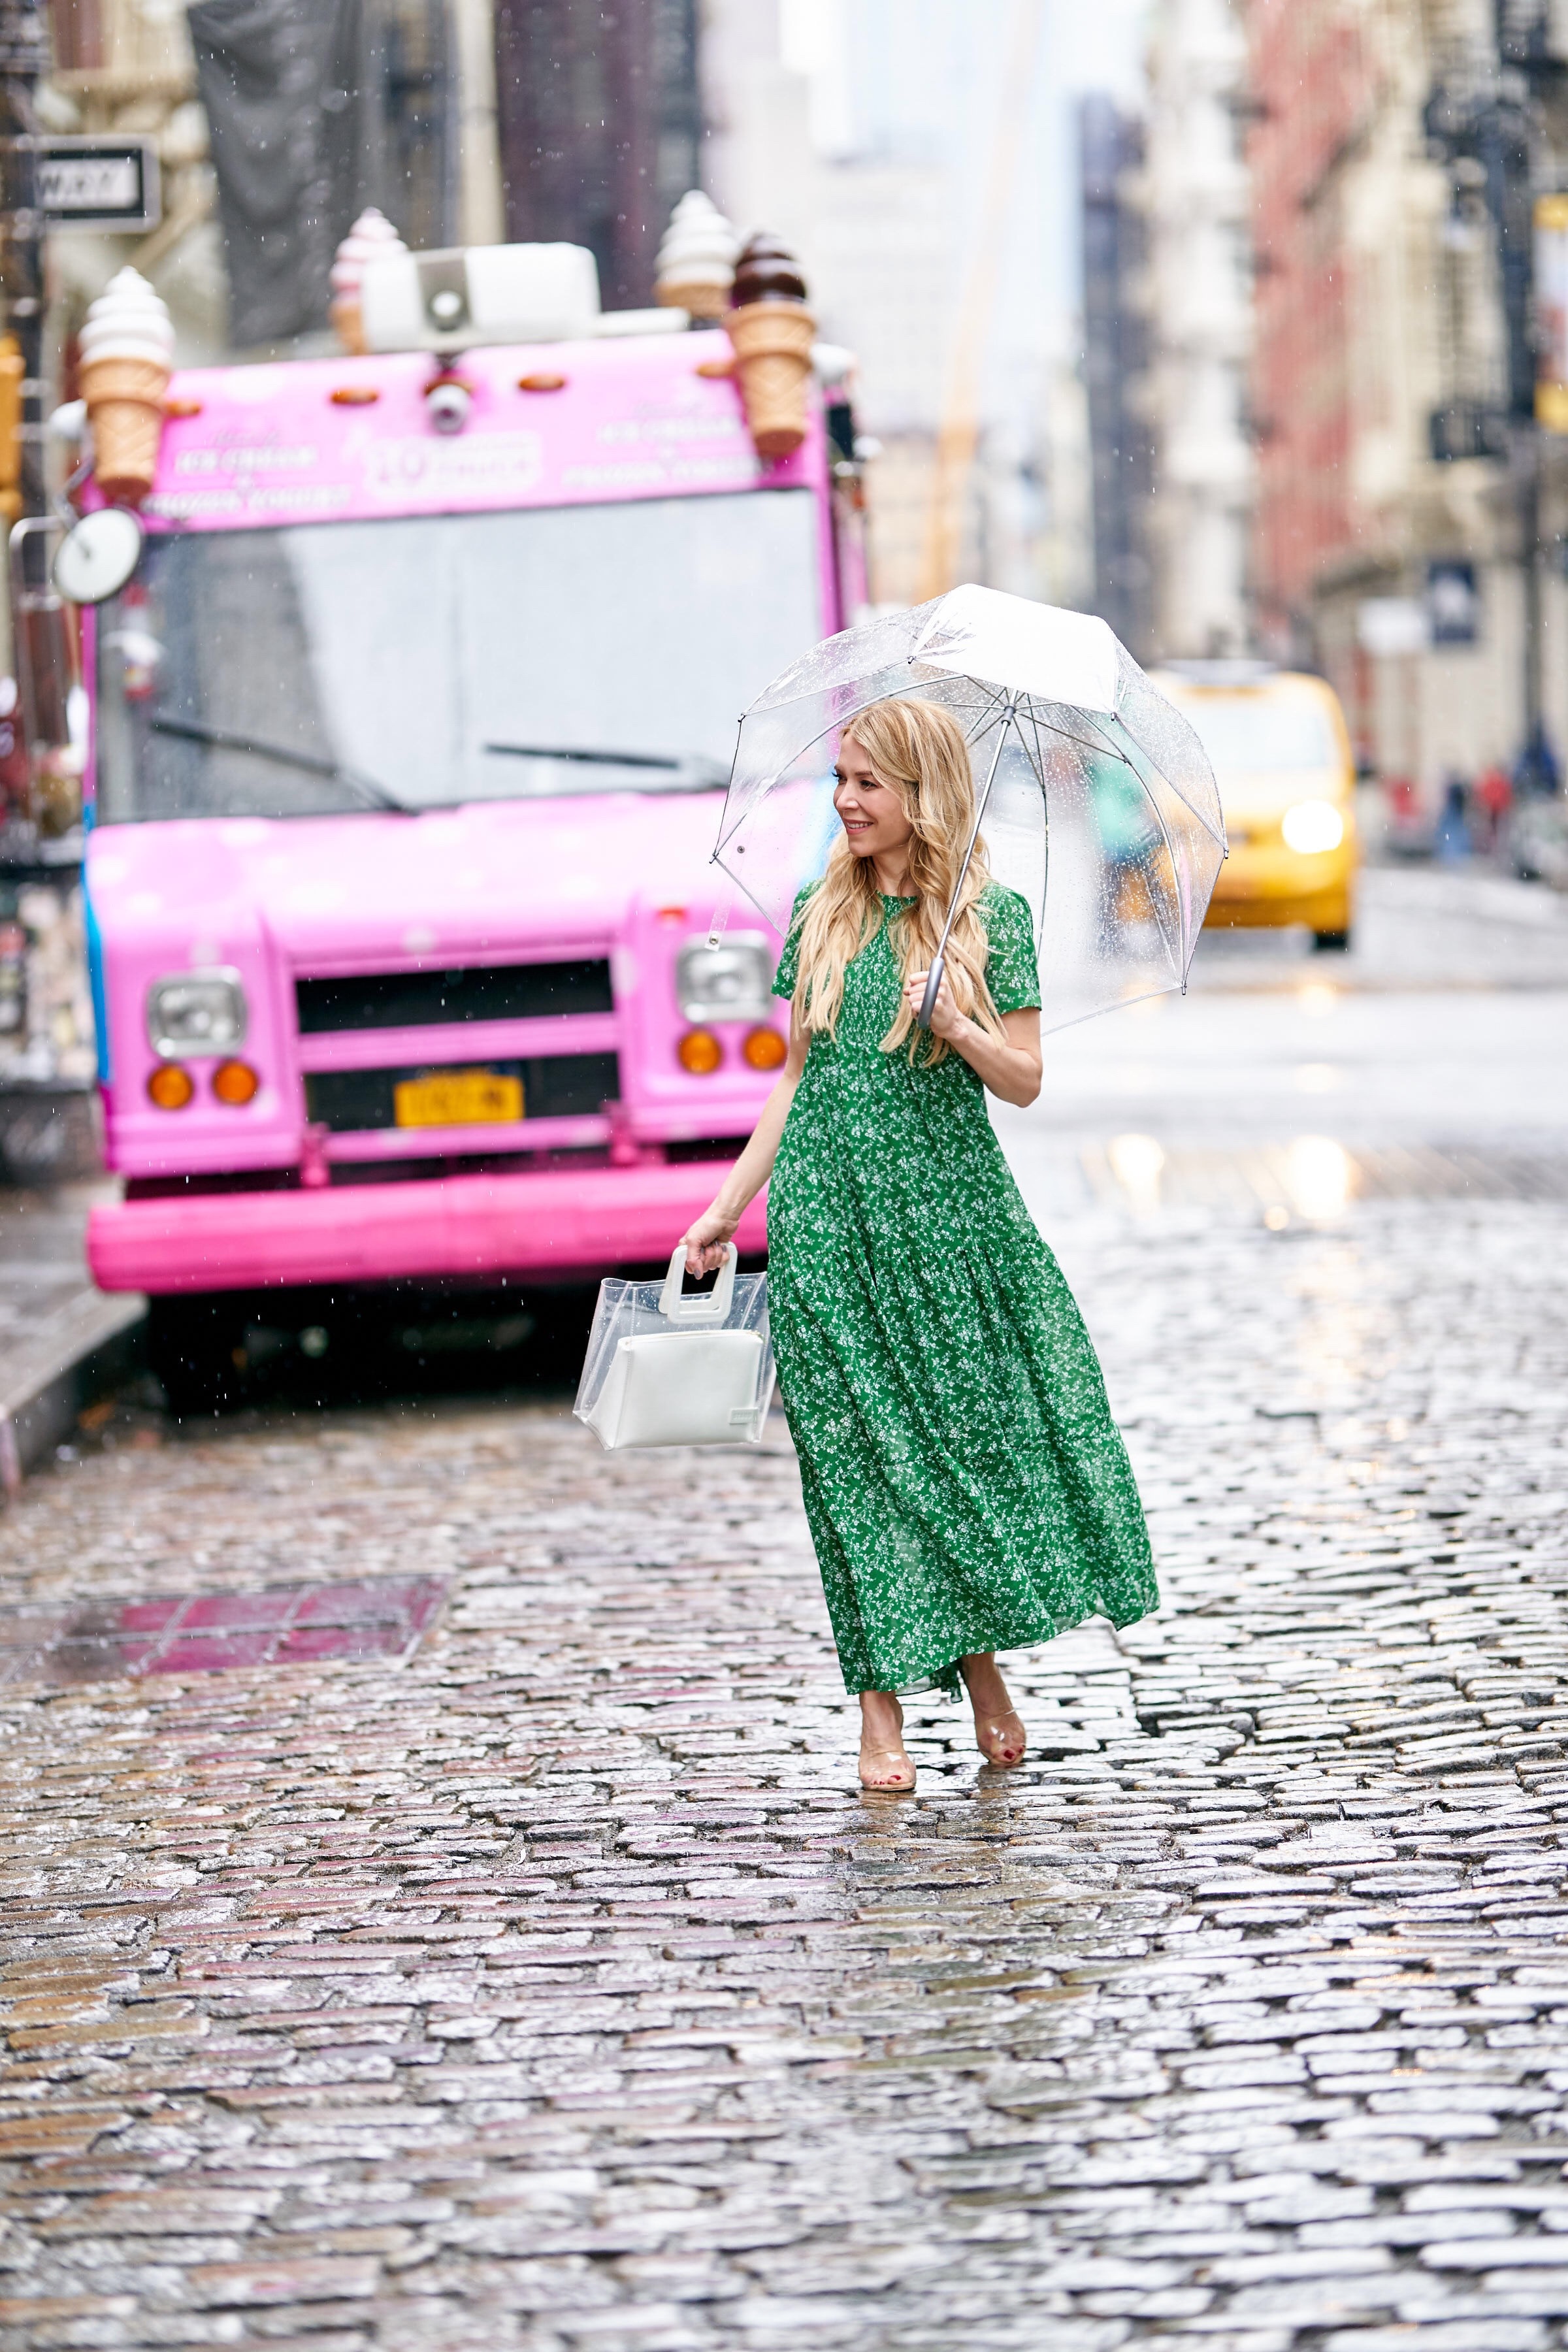 www.abouttheoutfits.com, Laura Bonner, About the Outfits, Green Maxi, Rainy day style